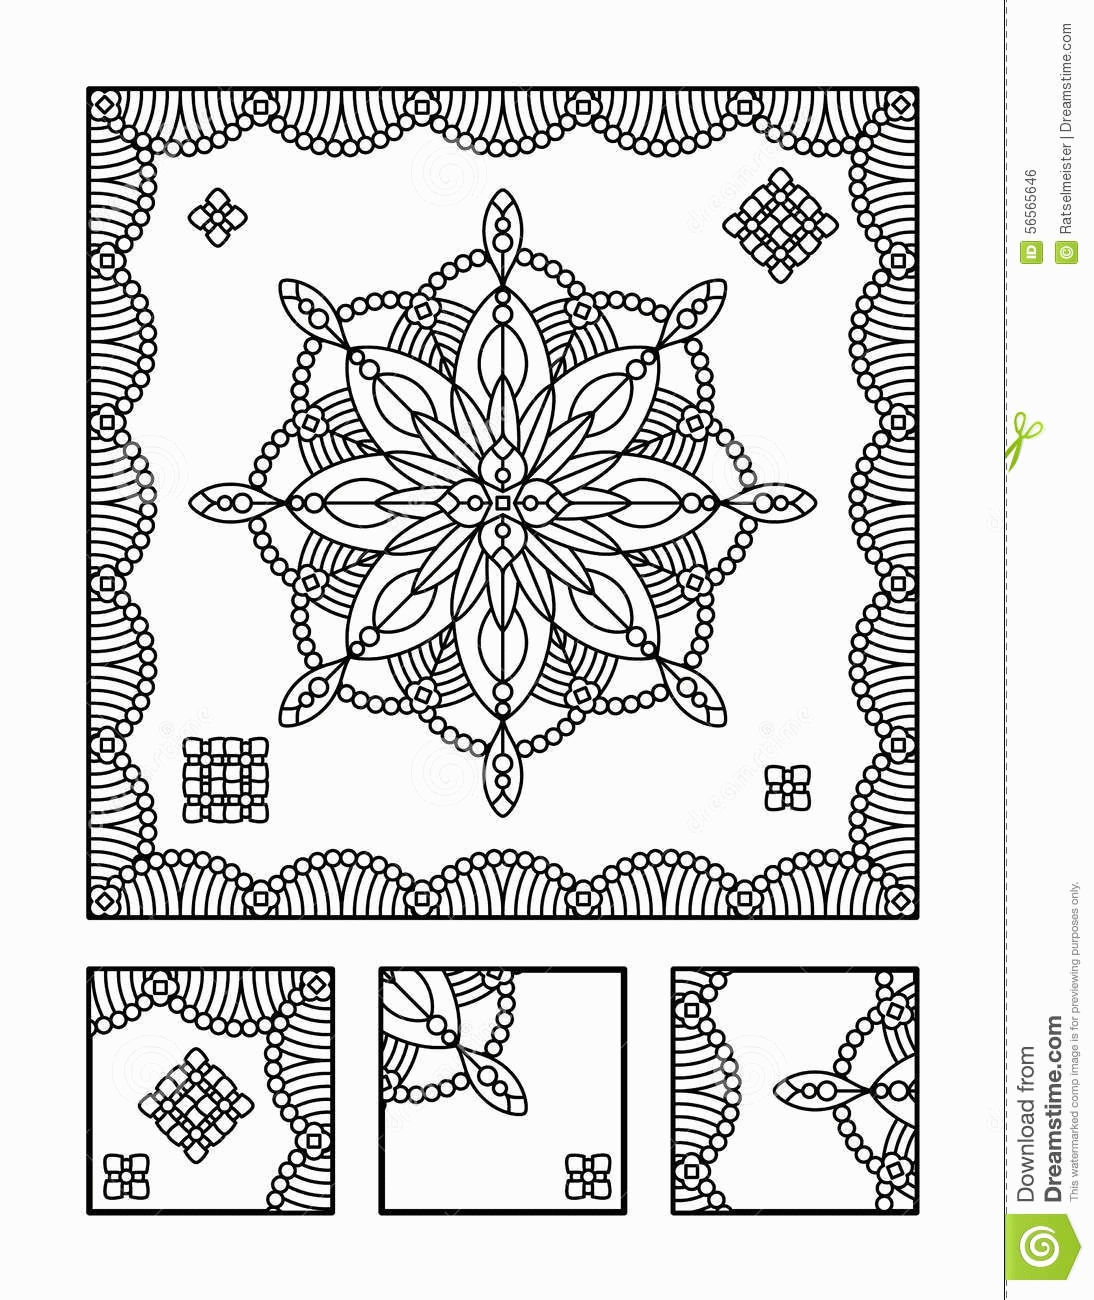 coloring-jigsaw-puzzles-printable-coloring-puzzle-coloring-page